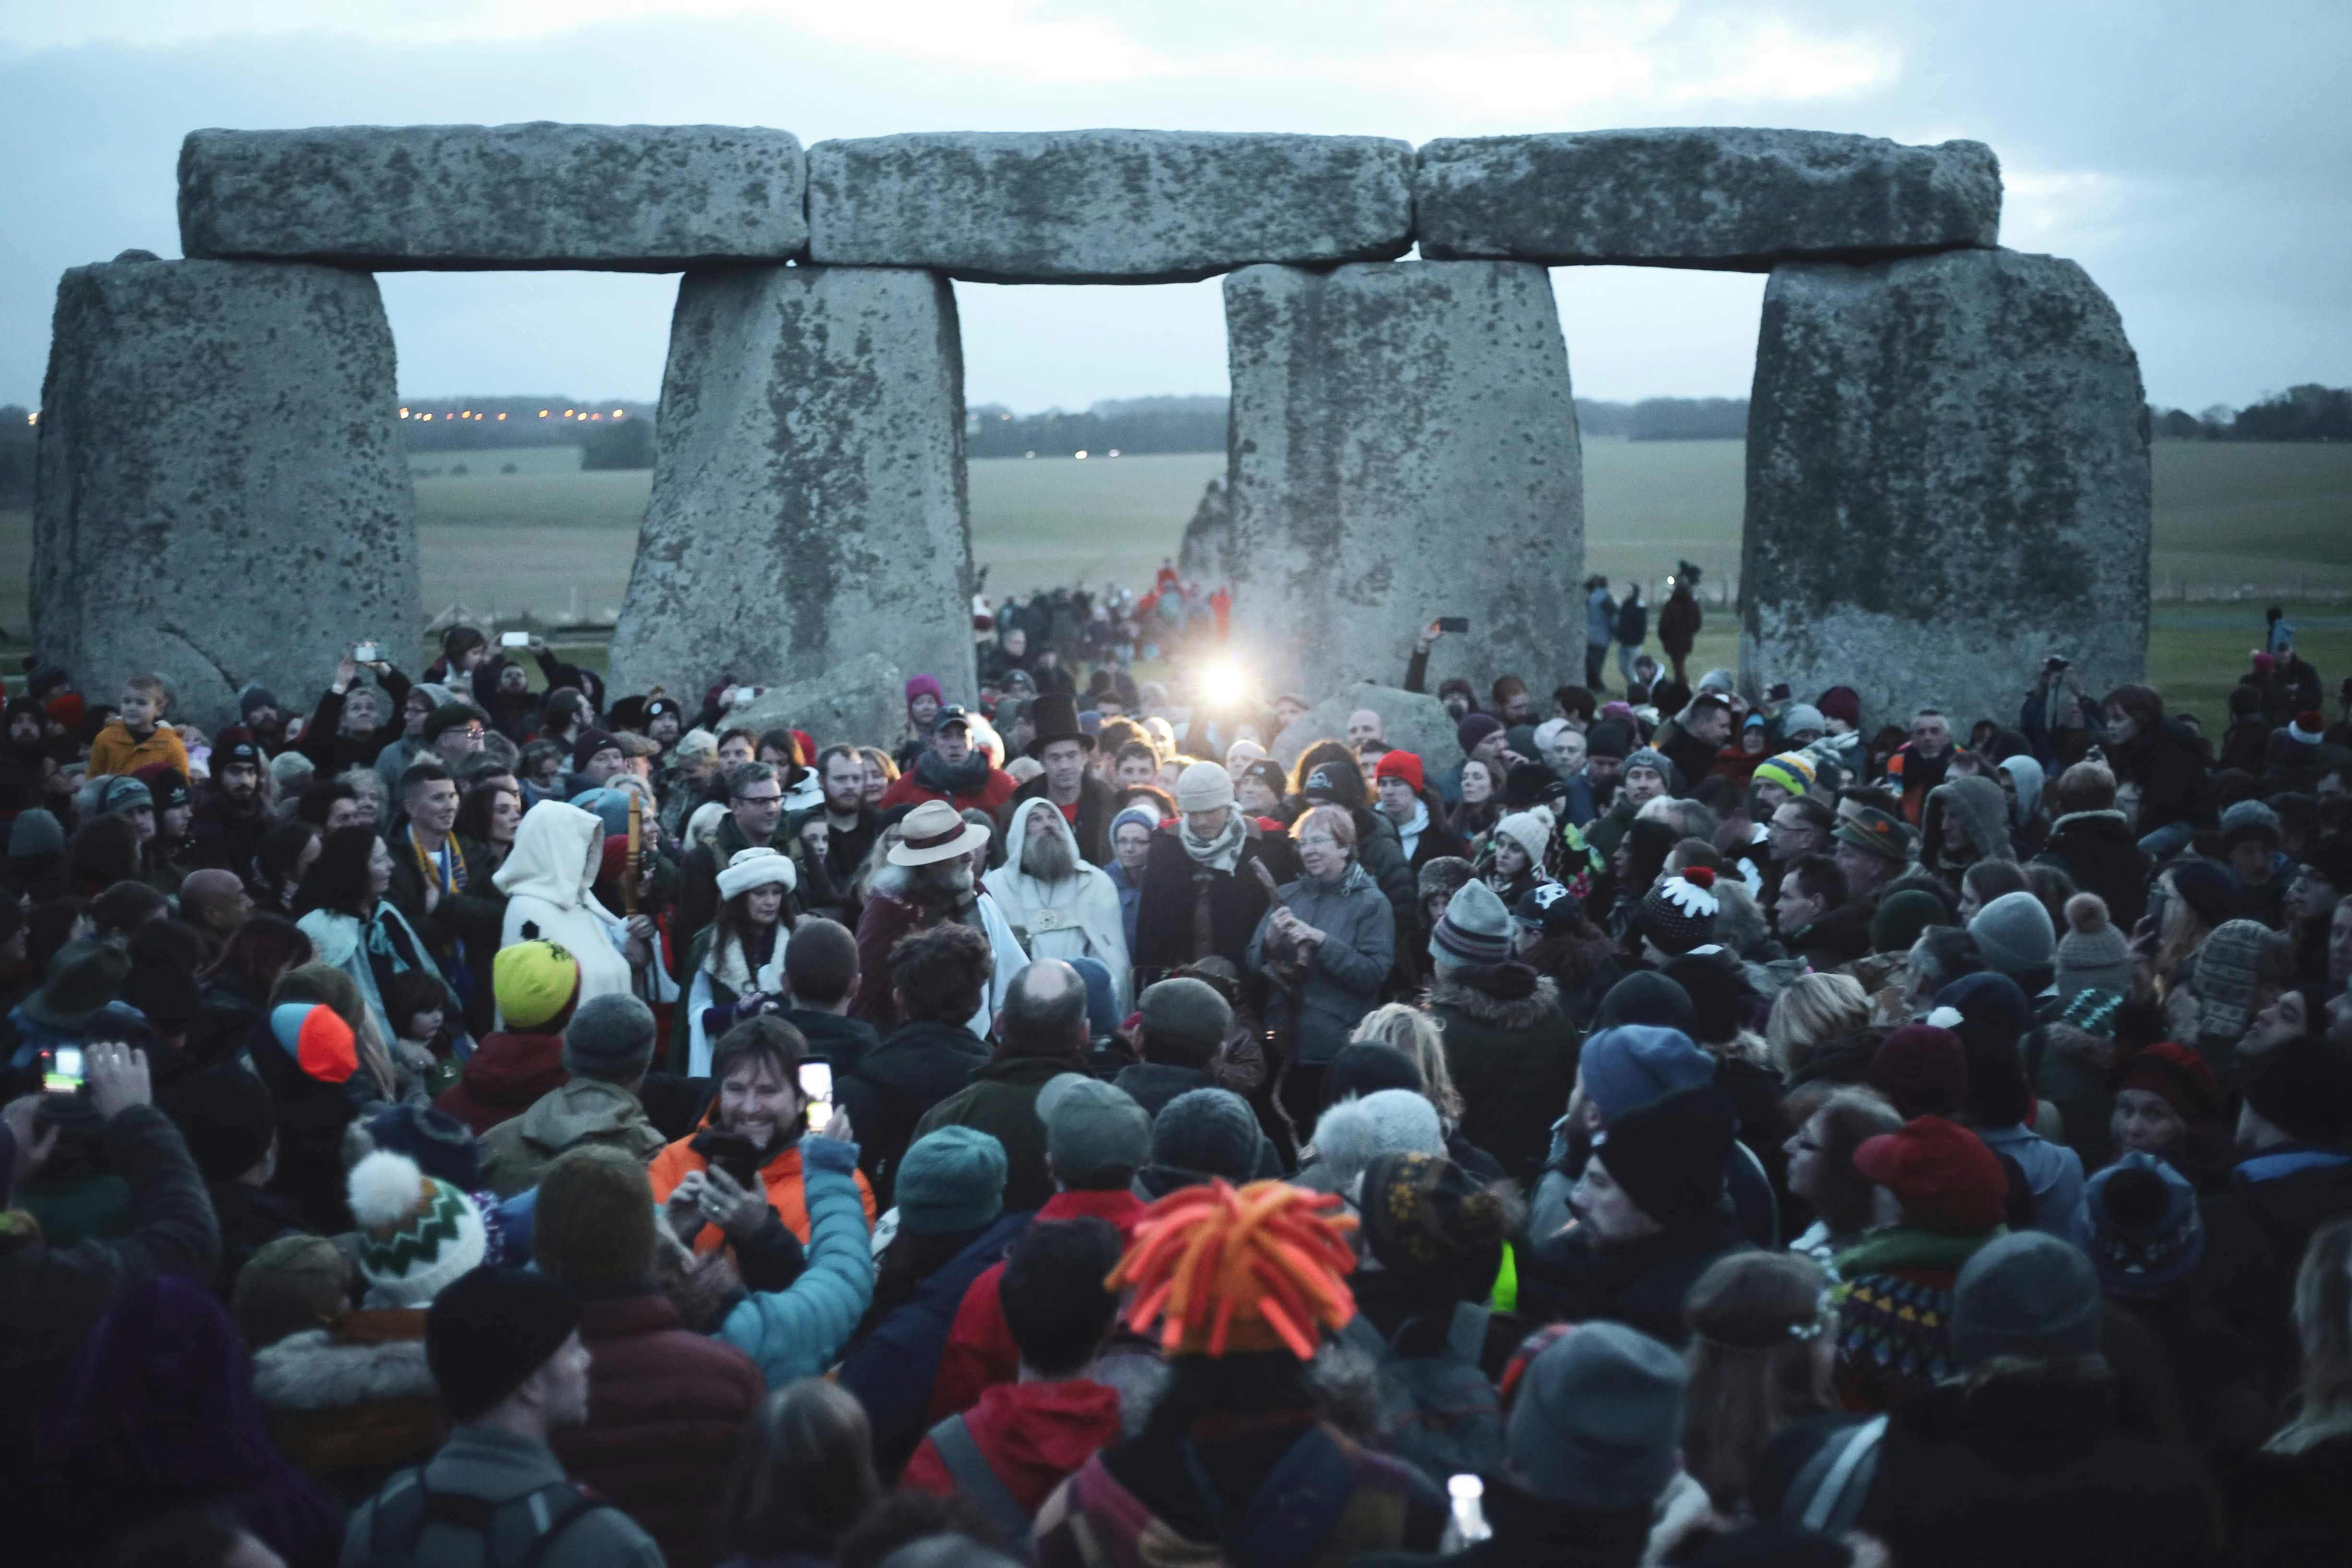 Stonehenge Opening Times Everything you need to plan your Stonehenge trip